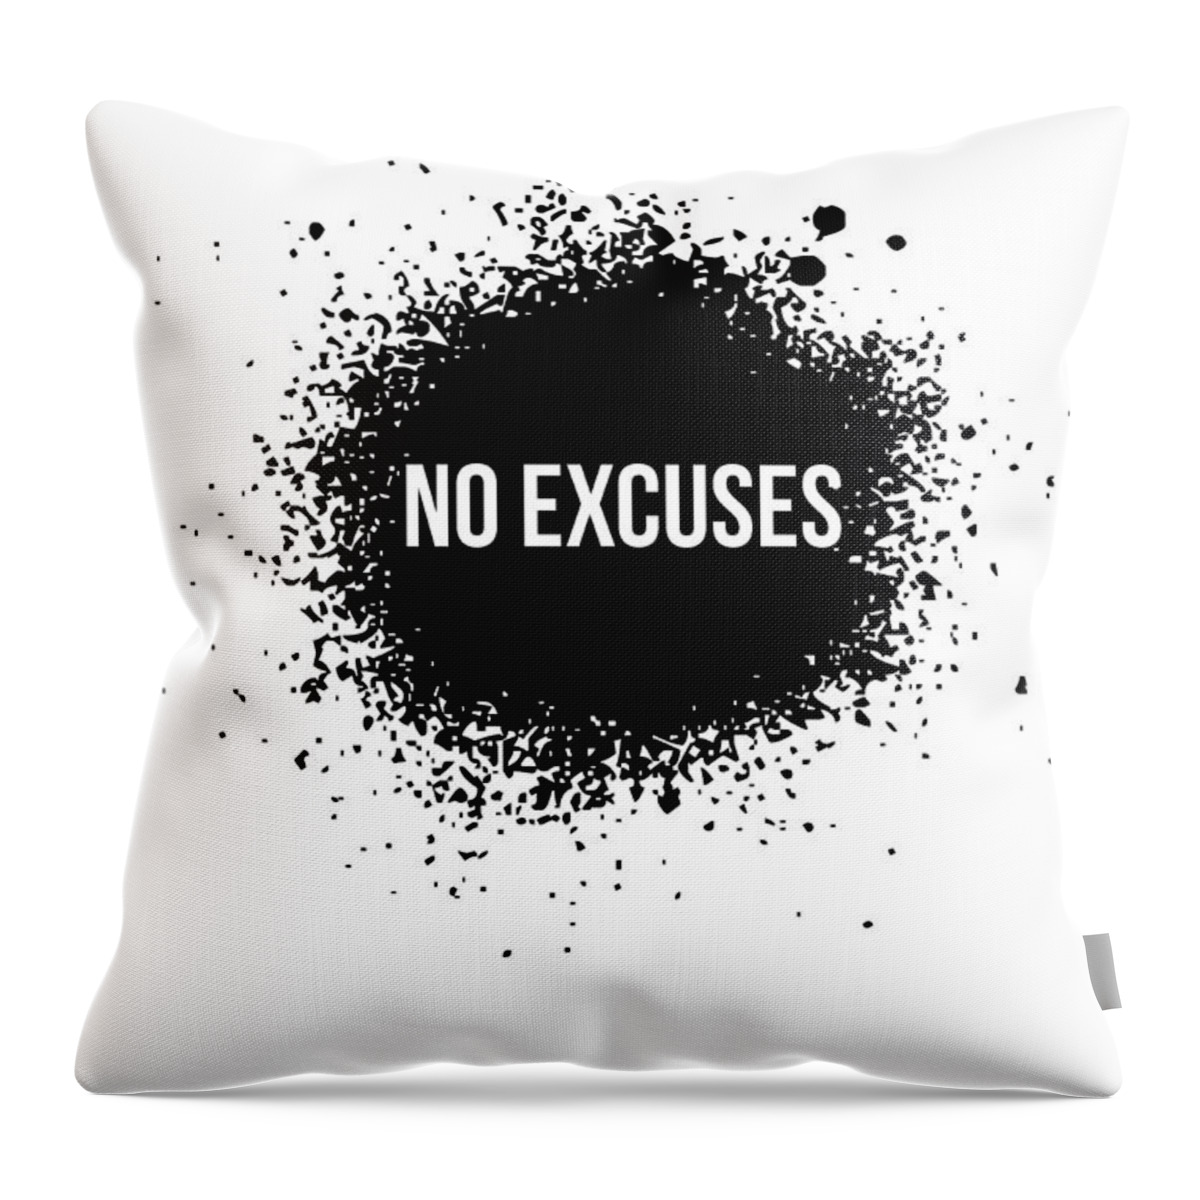 Motivational Throw Pillow featuring the digital art No Excuses Poster White by Naxart Studio